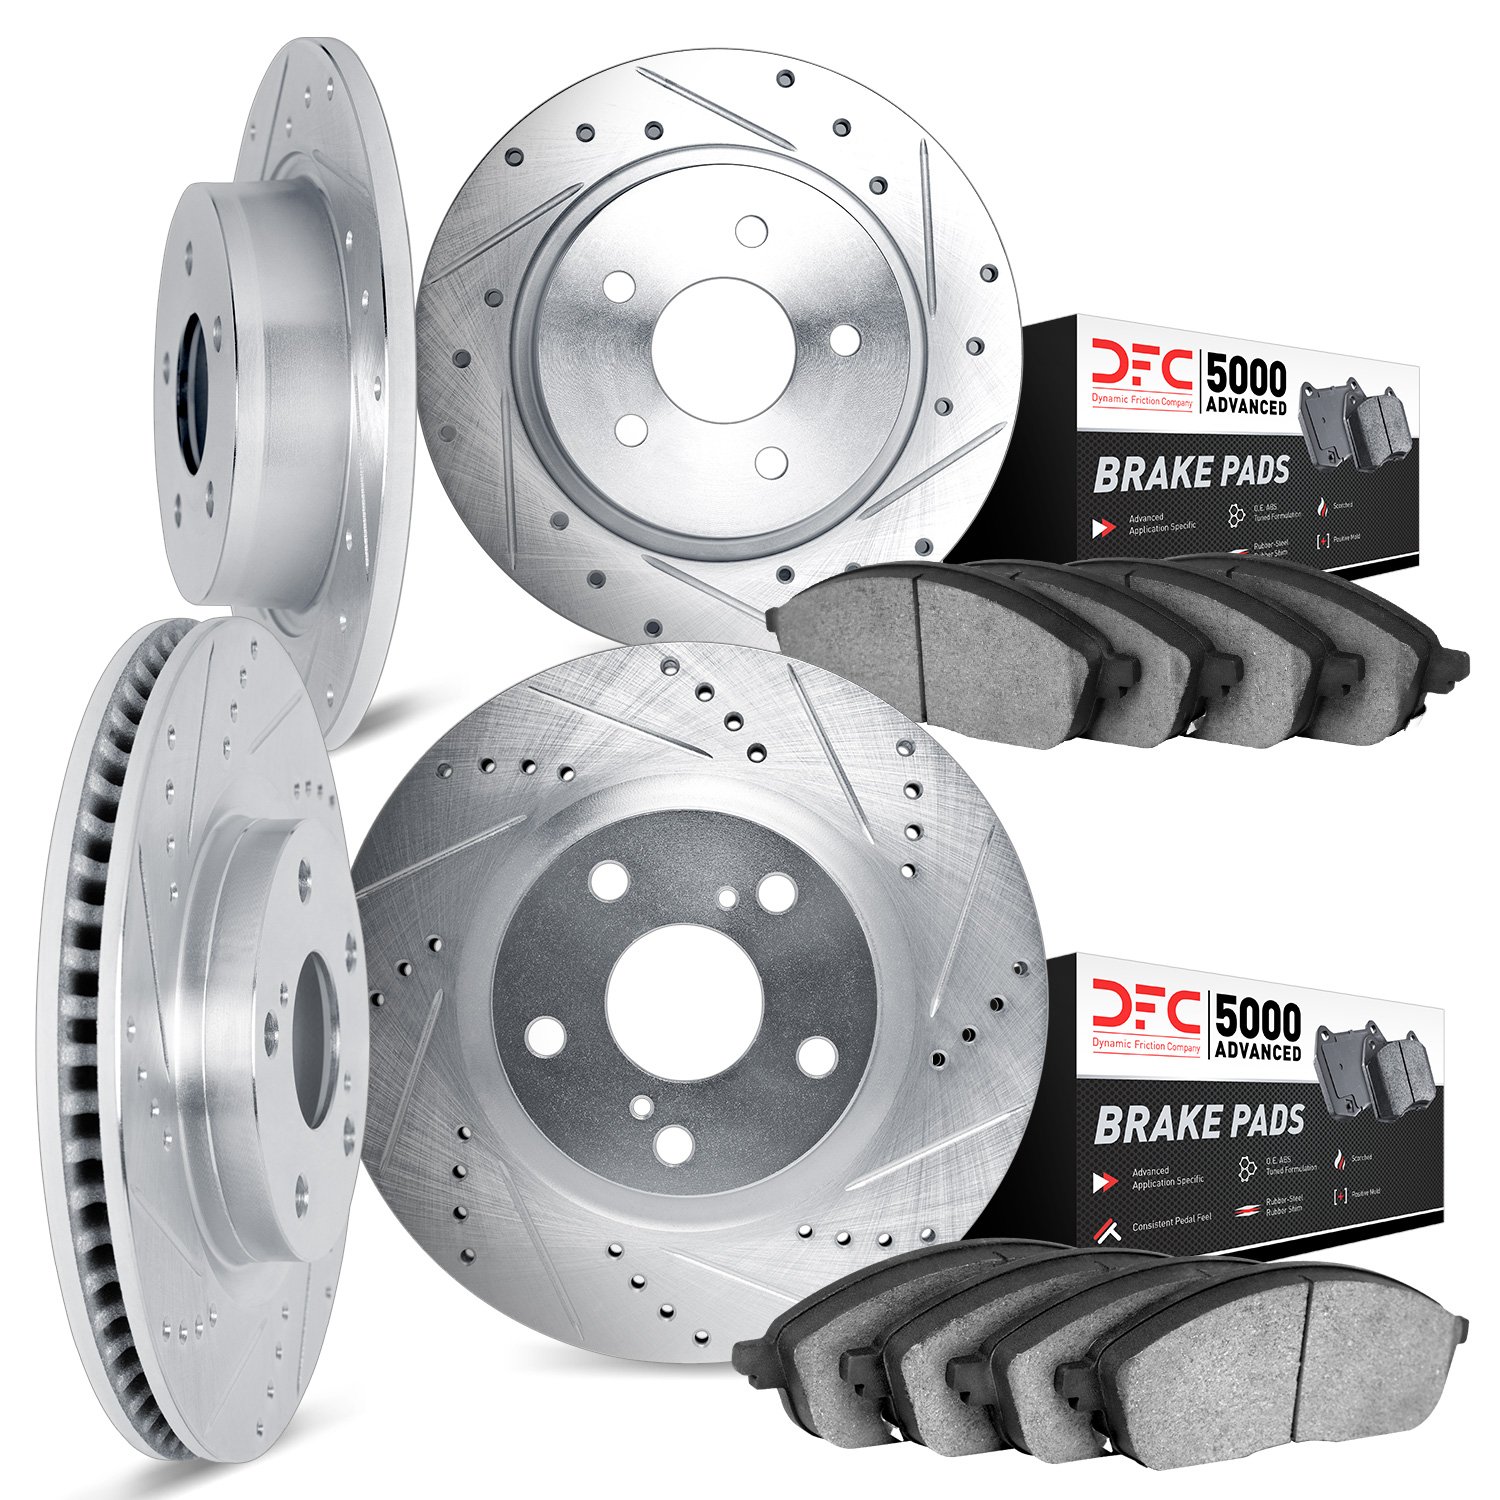 7504-54320 Drilled/Slotted Brake Rotors w/5000 Advanced Brake Pads Kit [Silver], 2001-2002 Ford/Lincoln/Mercury/Mazda, Position: